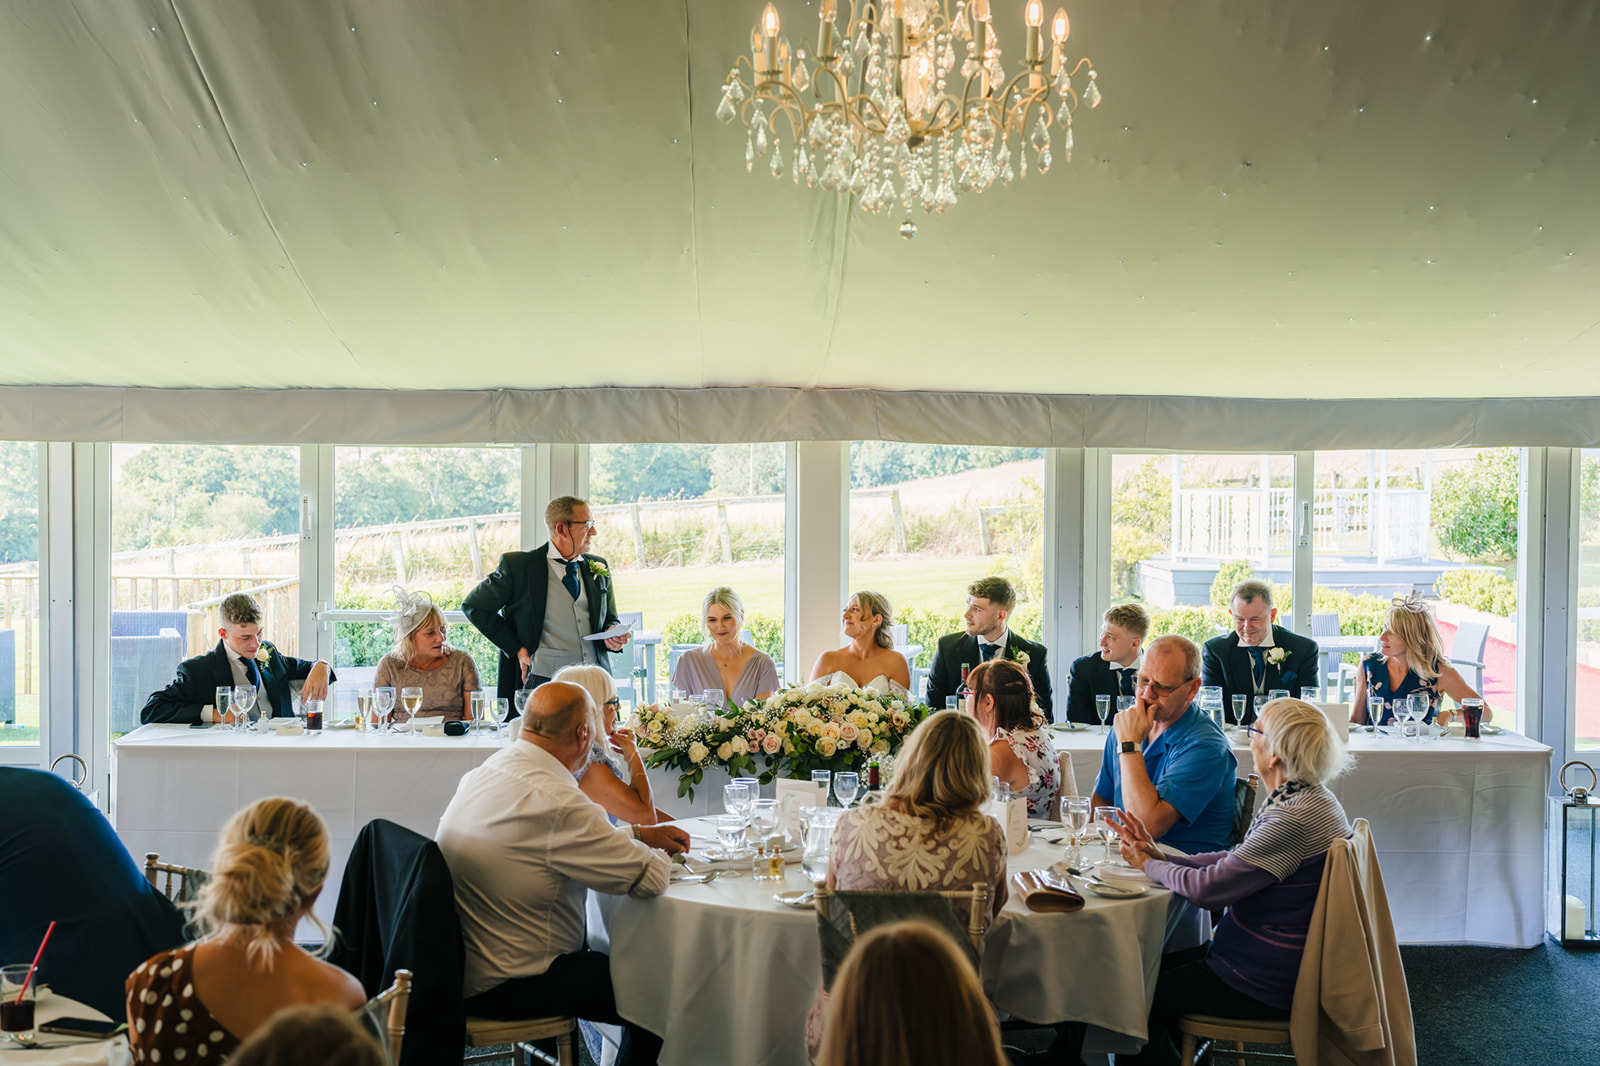 Shottle Hall Wedding Photography - the father of the bride giving his wedding speech